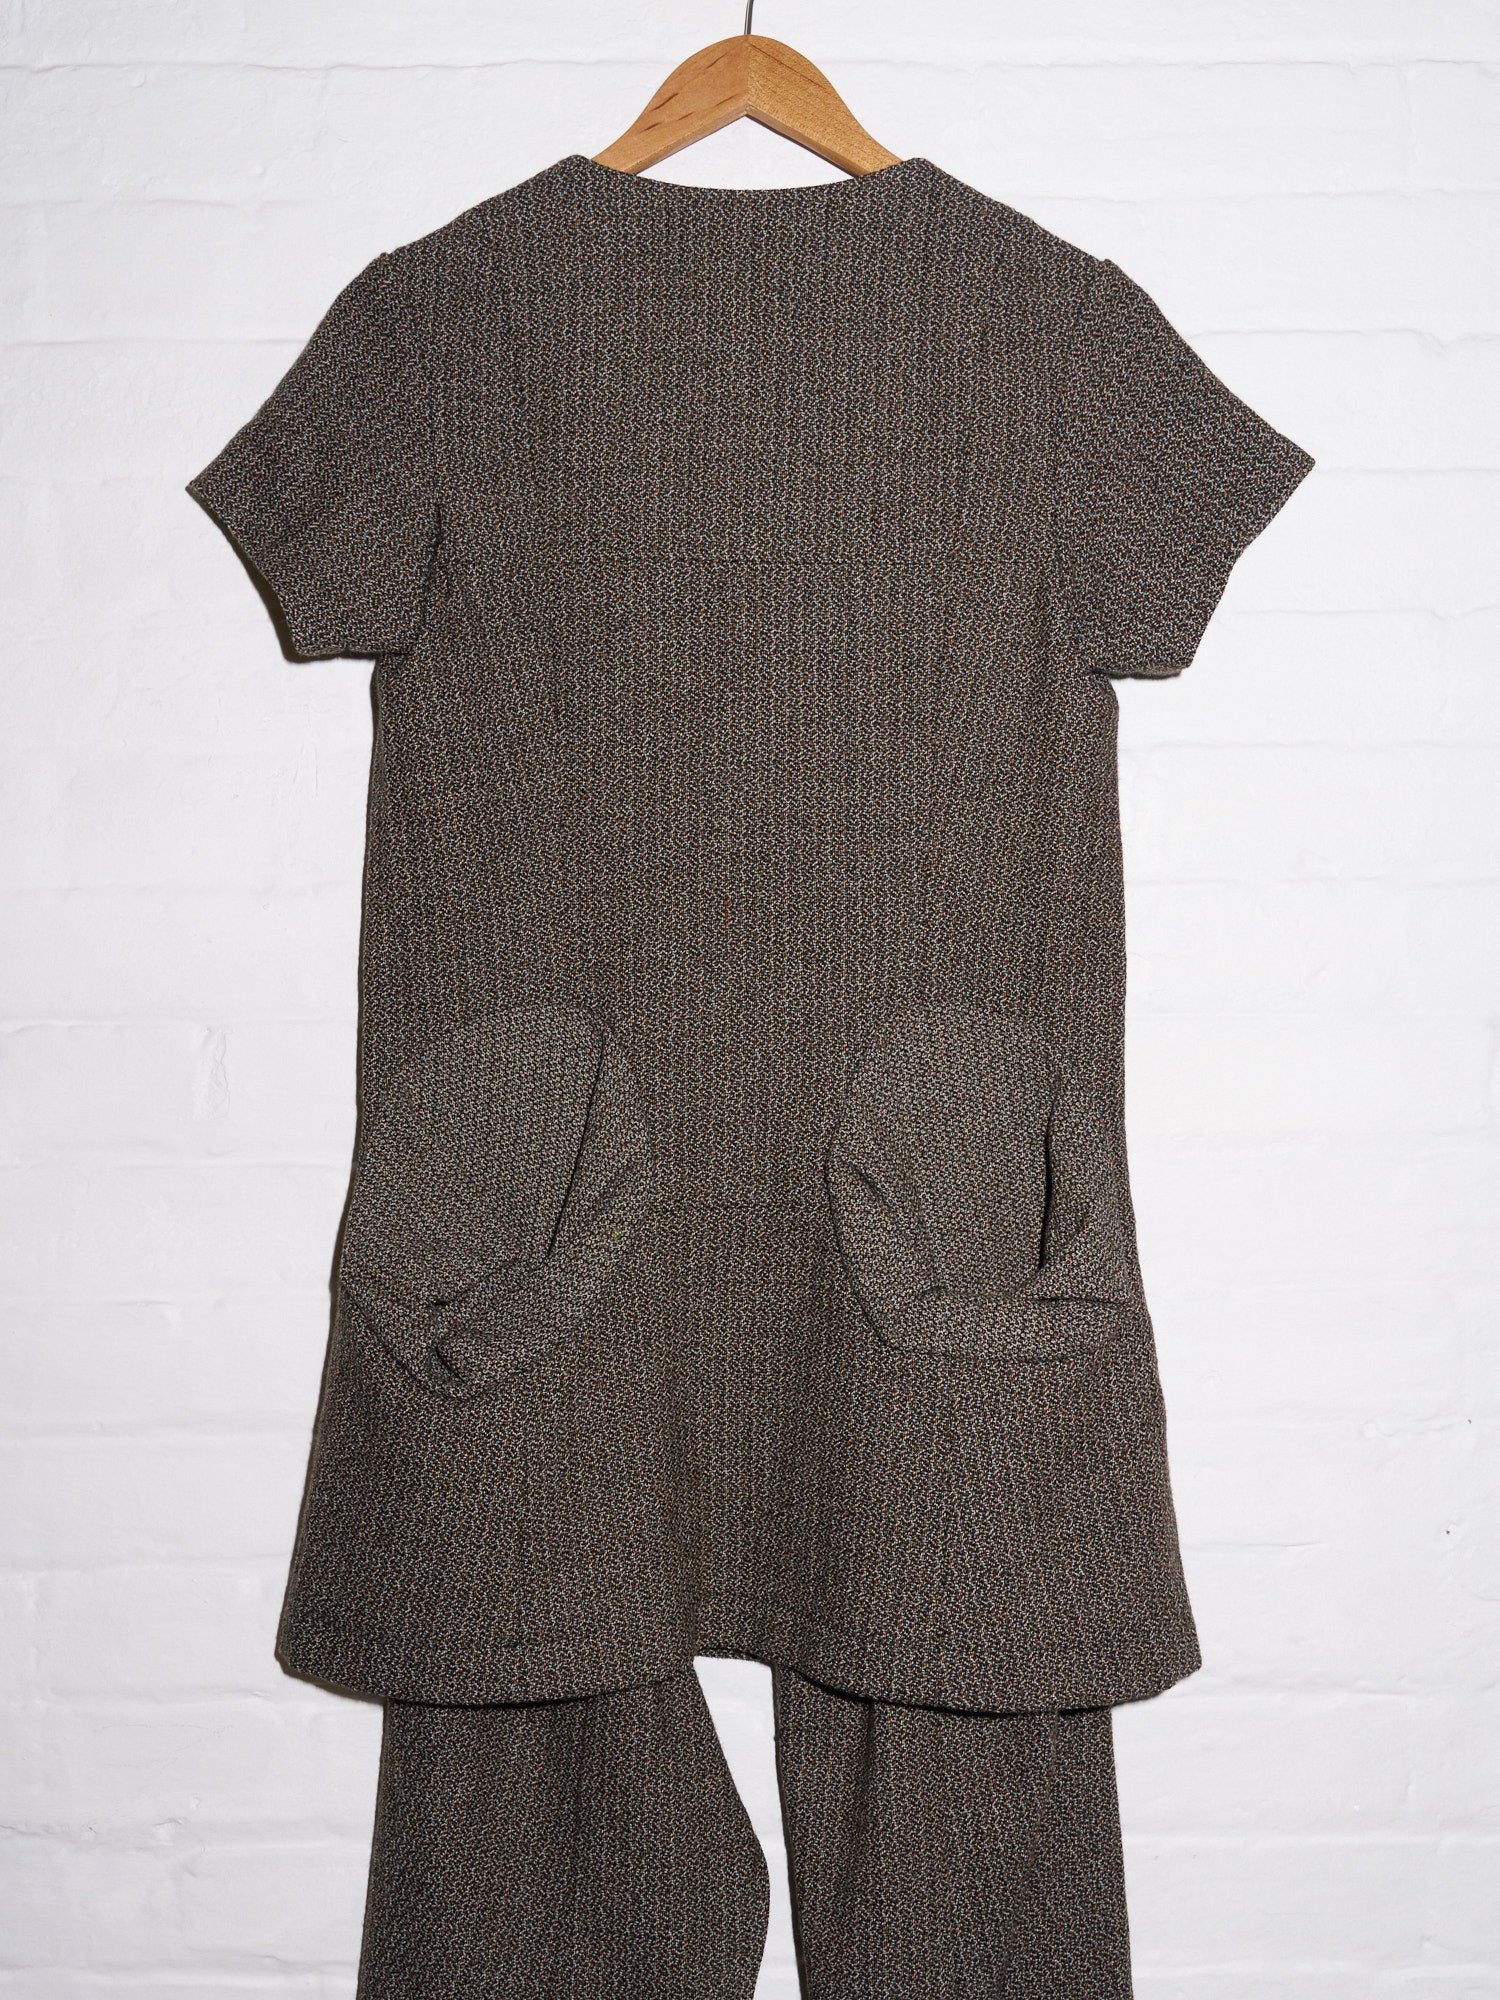 Junya Watanabe Comme des Garcons AW1996 brown speckled wool fake layered jumpsuit